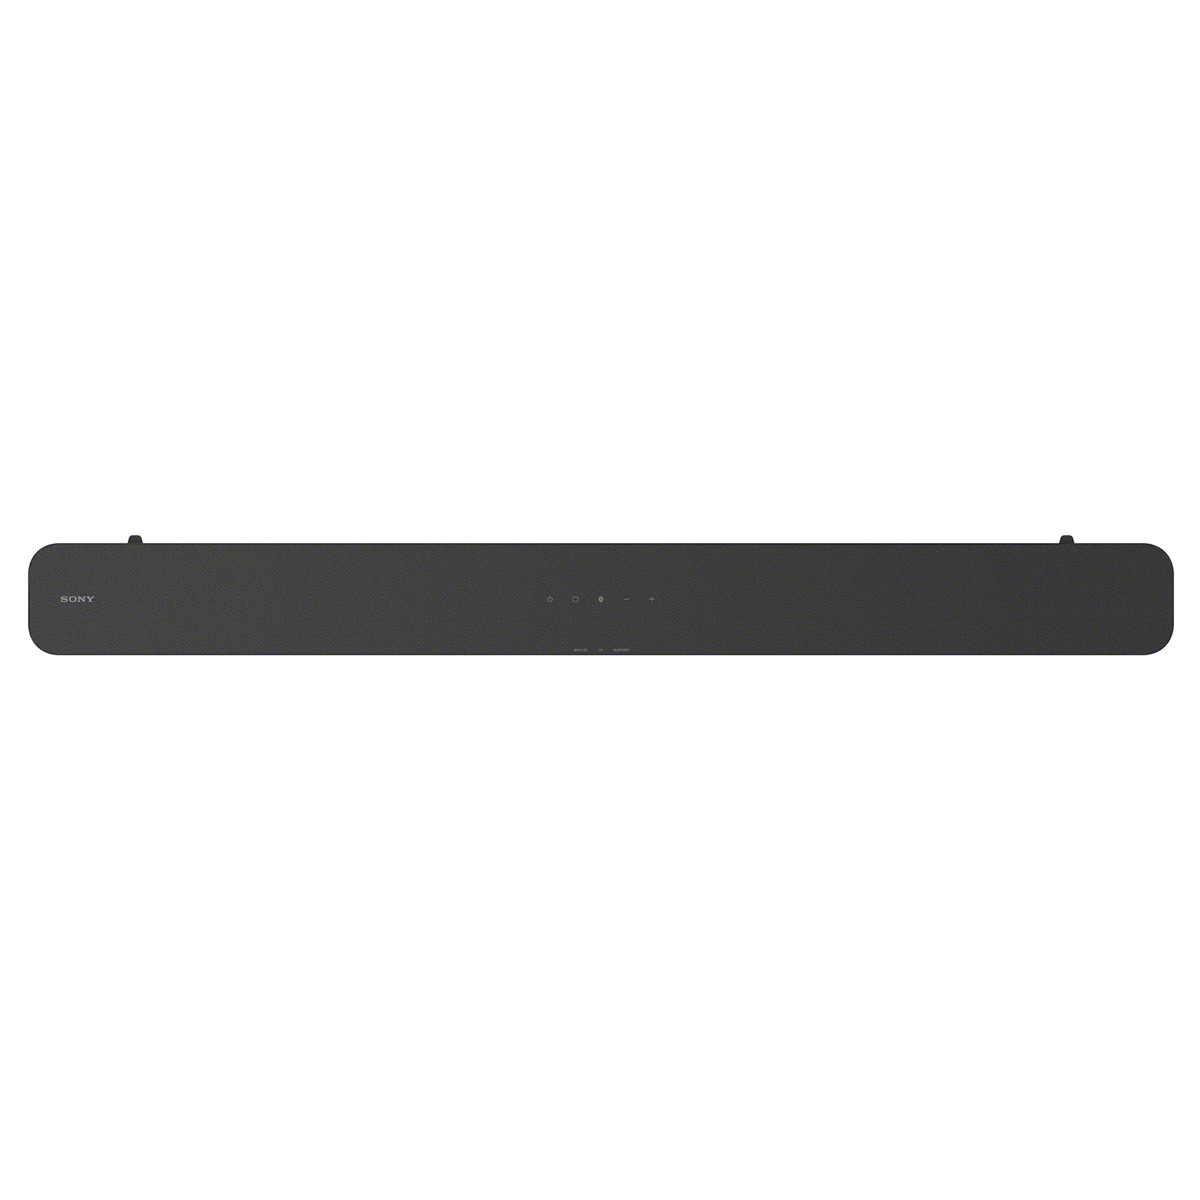 Sony HTS350 2.1 Channel Soundbar with Powerful Wireless Subwoofer and Bluetooth - image 5 of 11